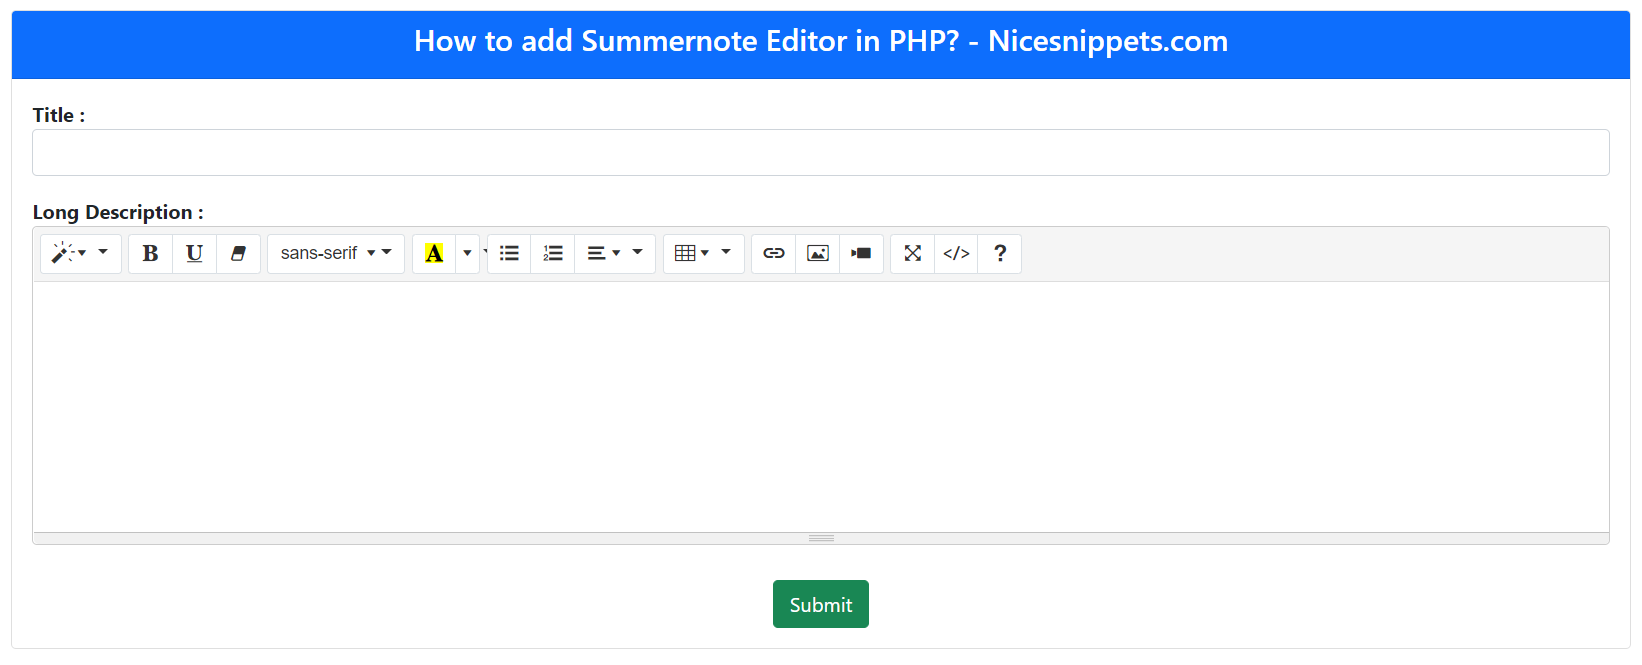 How to add Summernote Editor in PHP?